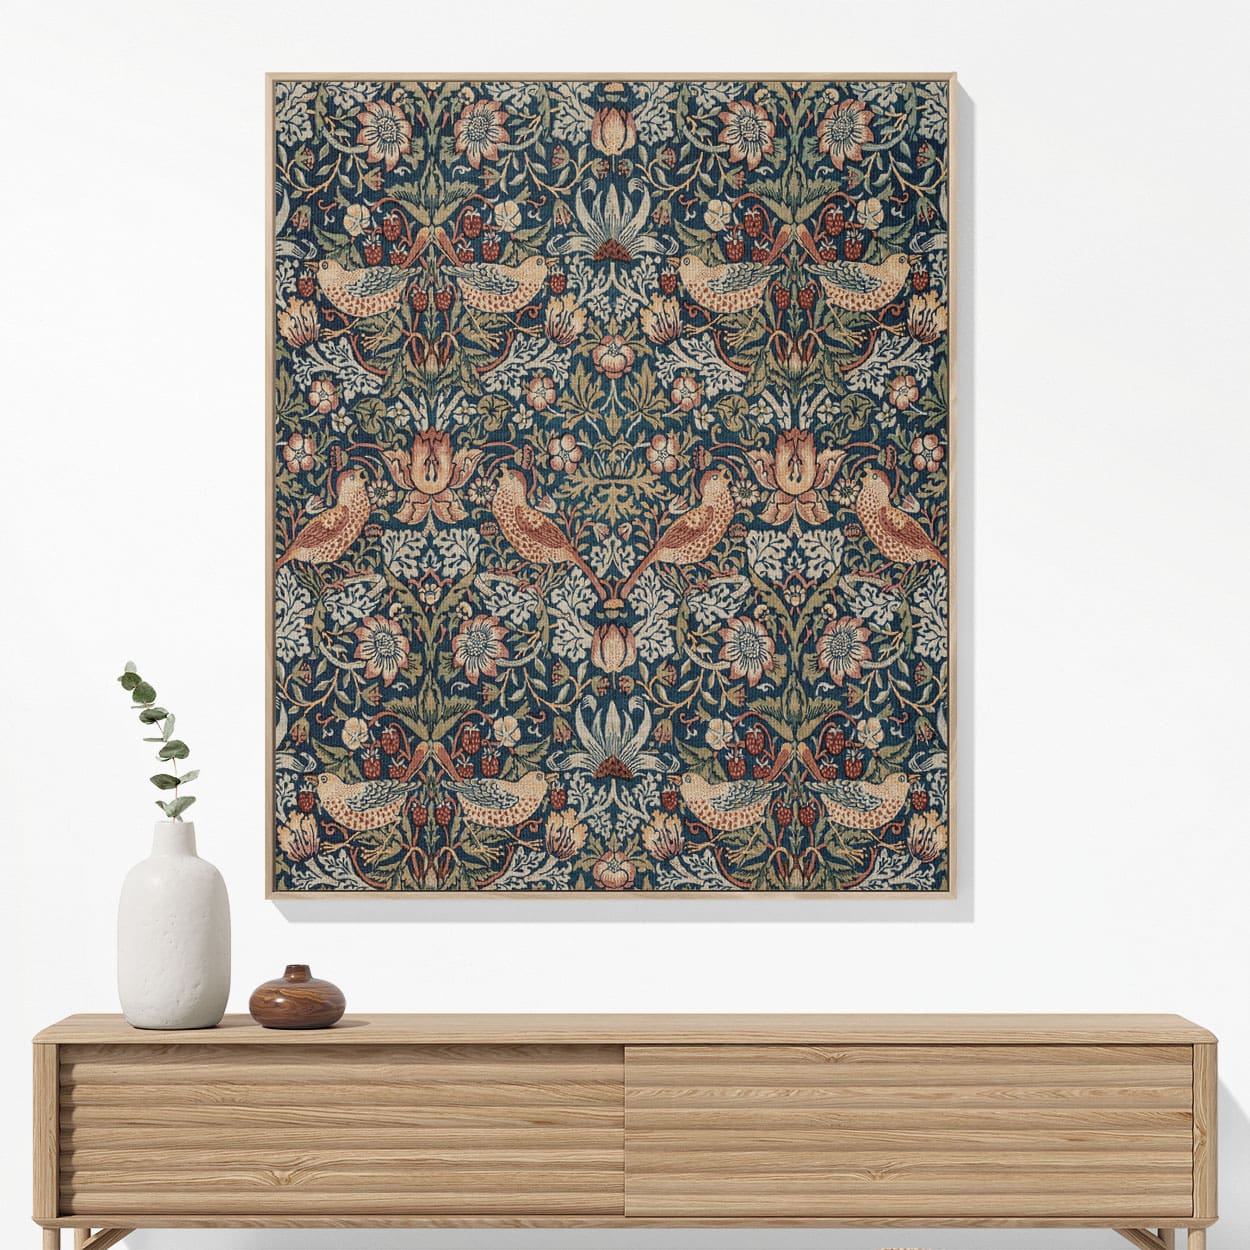 Birds and Plants Woven Blanket Woven Blanket Hanging on a Wall as Framed Wall Art